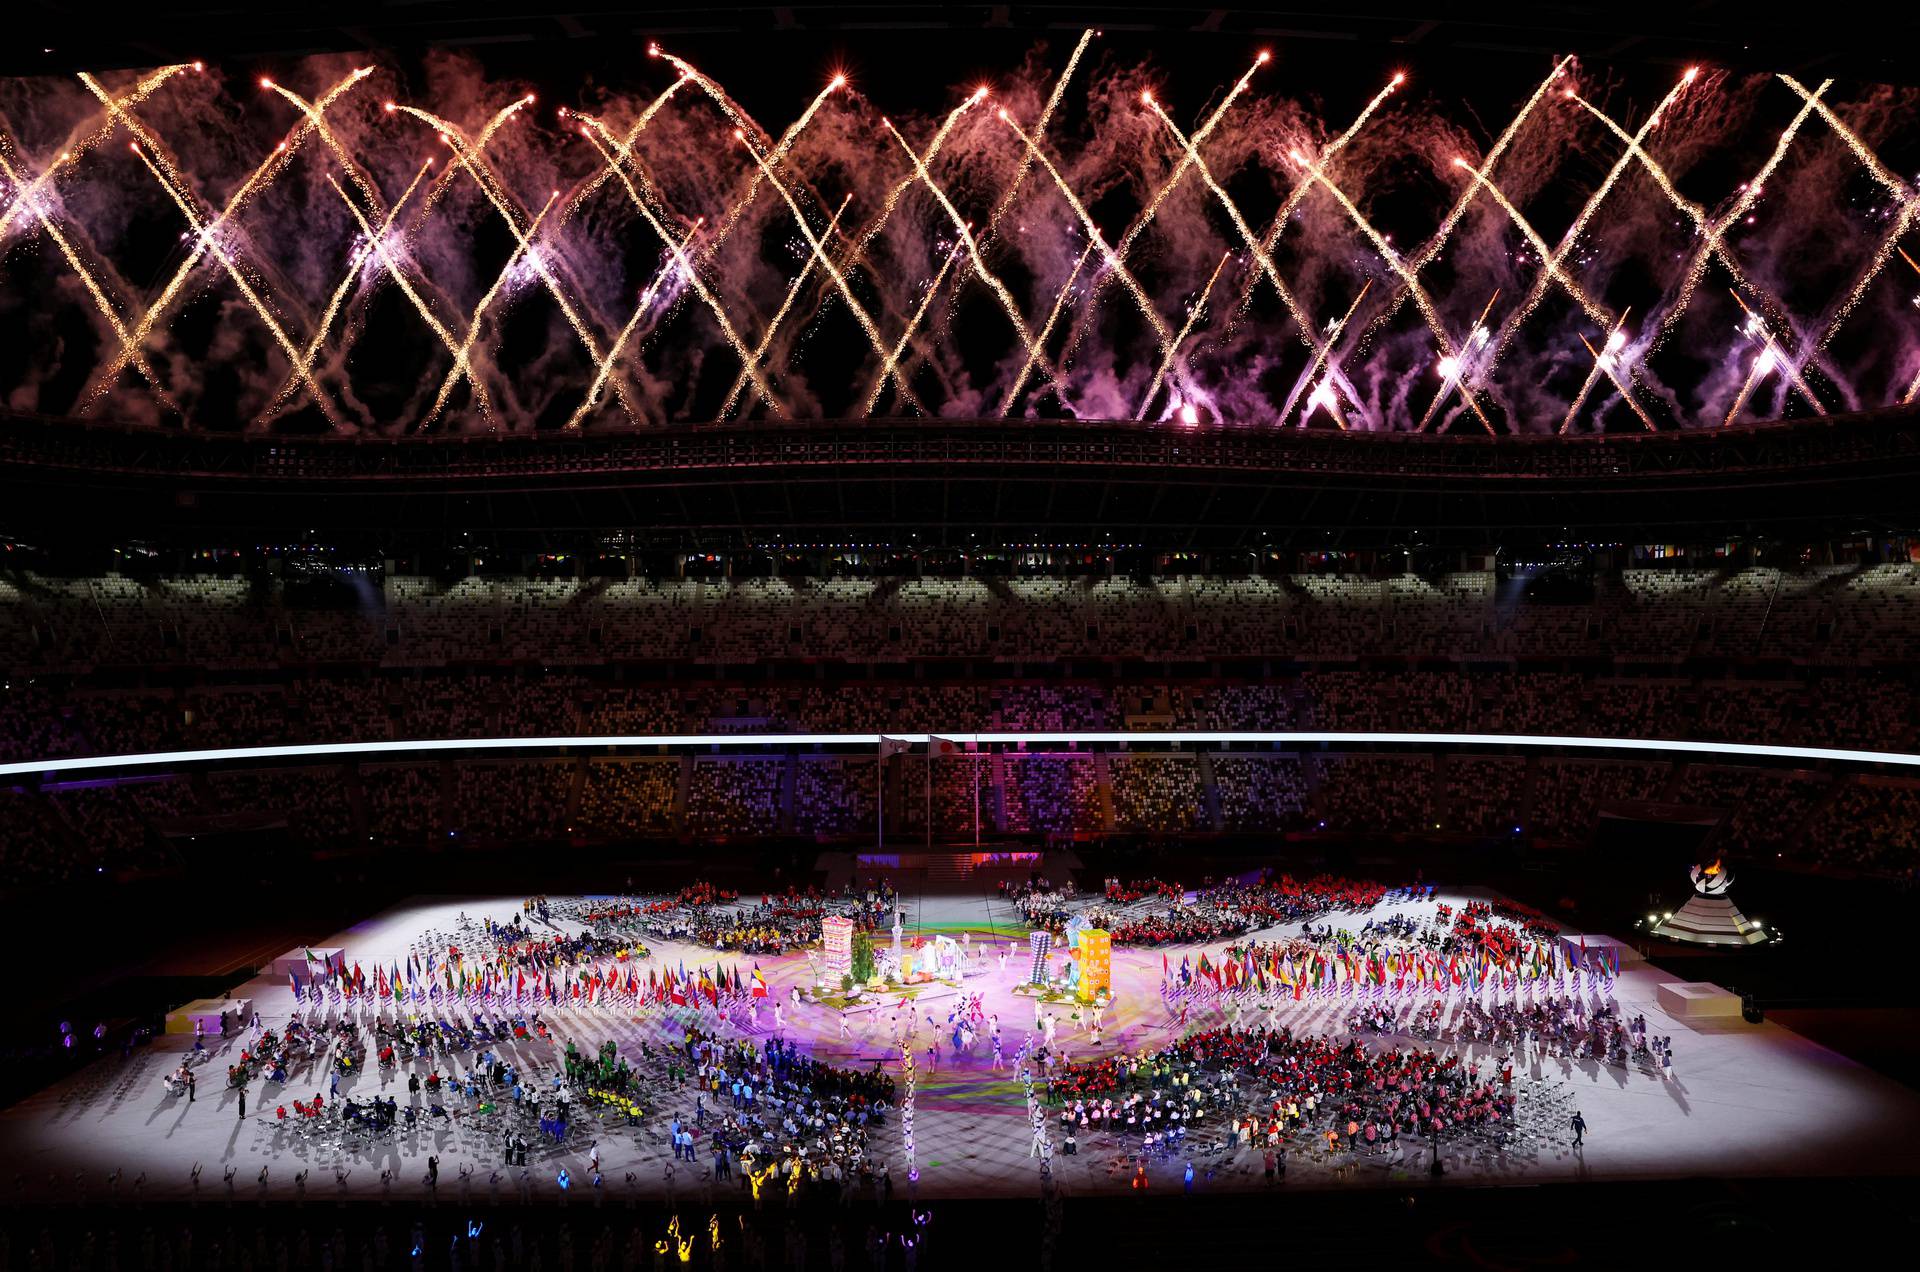 Tokyo 2020 Paralympic Games - The Tokyo 2020 Paralympic Games Closing Ceremony